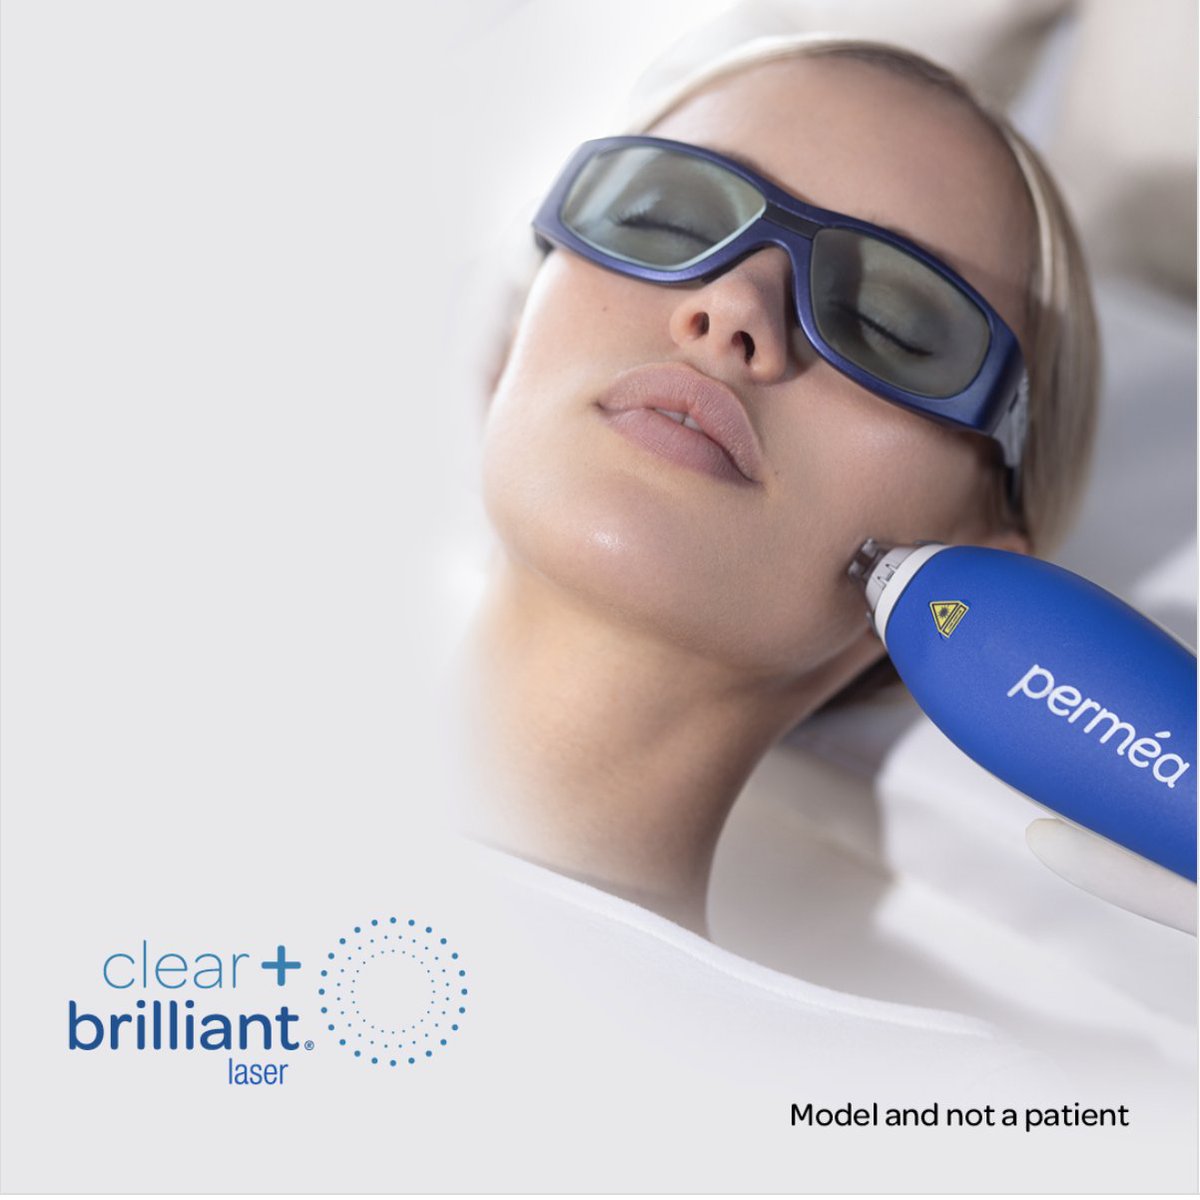 Want a smoother more youthful appearance? Clear & Brilliant may be the right treatment for you! Book a complimentary 15 minute consultation for more information. #clearandbrilliant #lasertreatment #skincare #selfcare #glowingskin #antiaging #celebrity